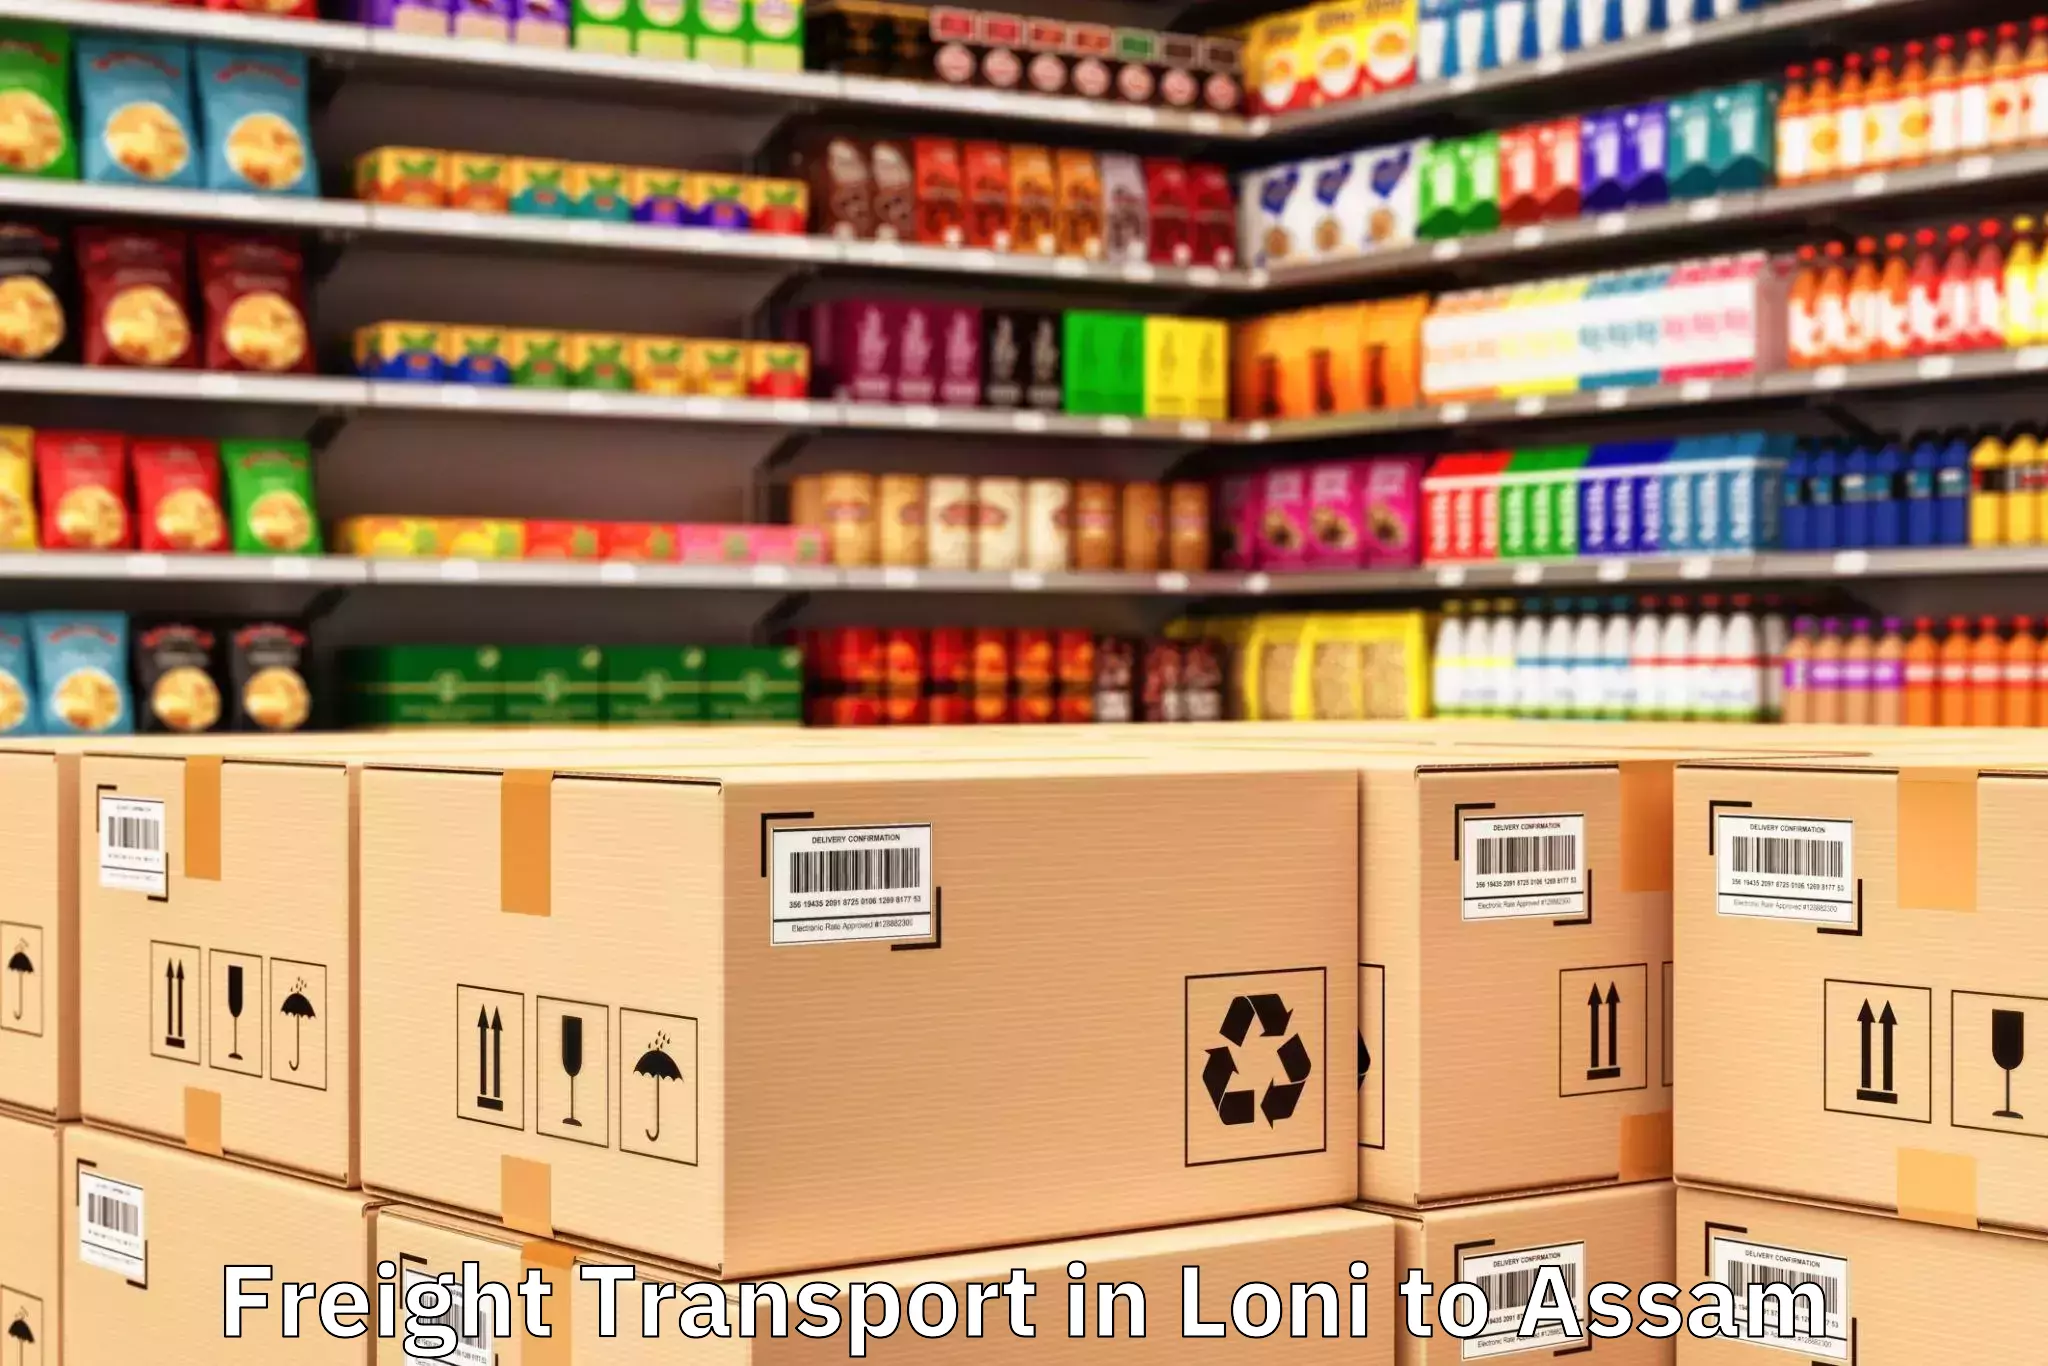 Reliable Loni to Kimin Freight Transport